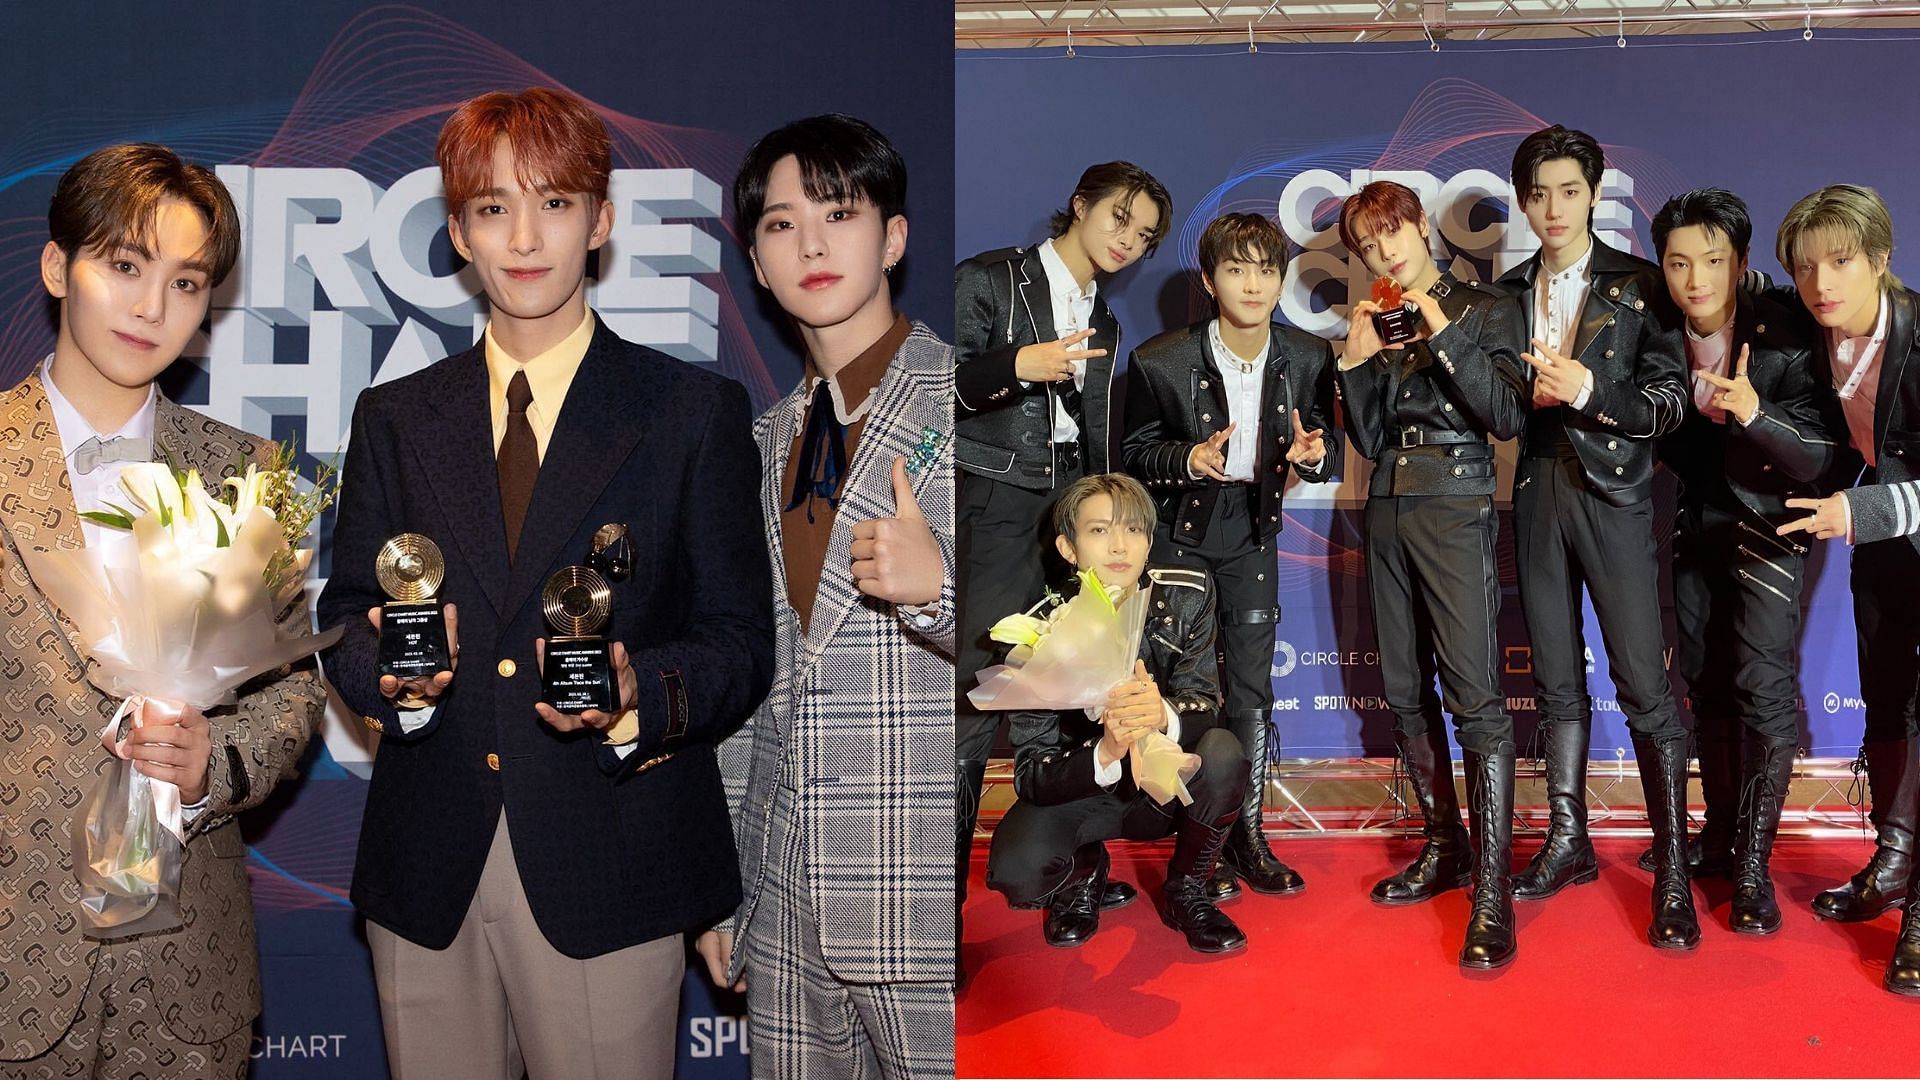 SEVENTEEN and ENHYPEN are among the winners at the 12th Circle Chart Music Awards (Images via Twitter/pledis_17 and ENHYPEN)